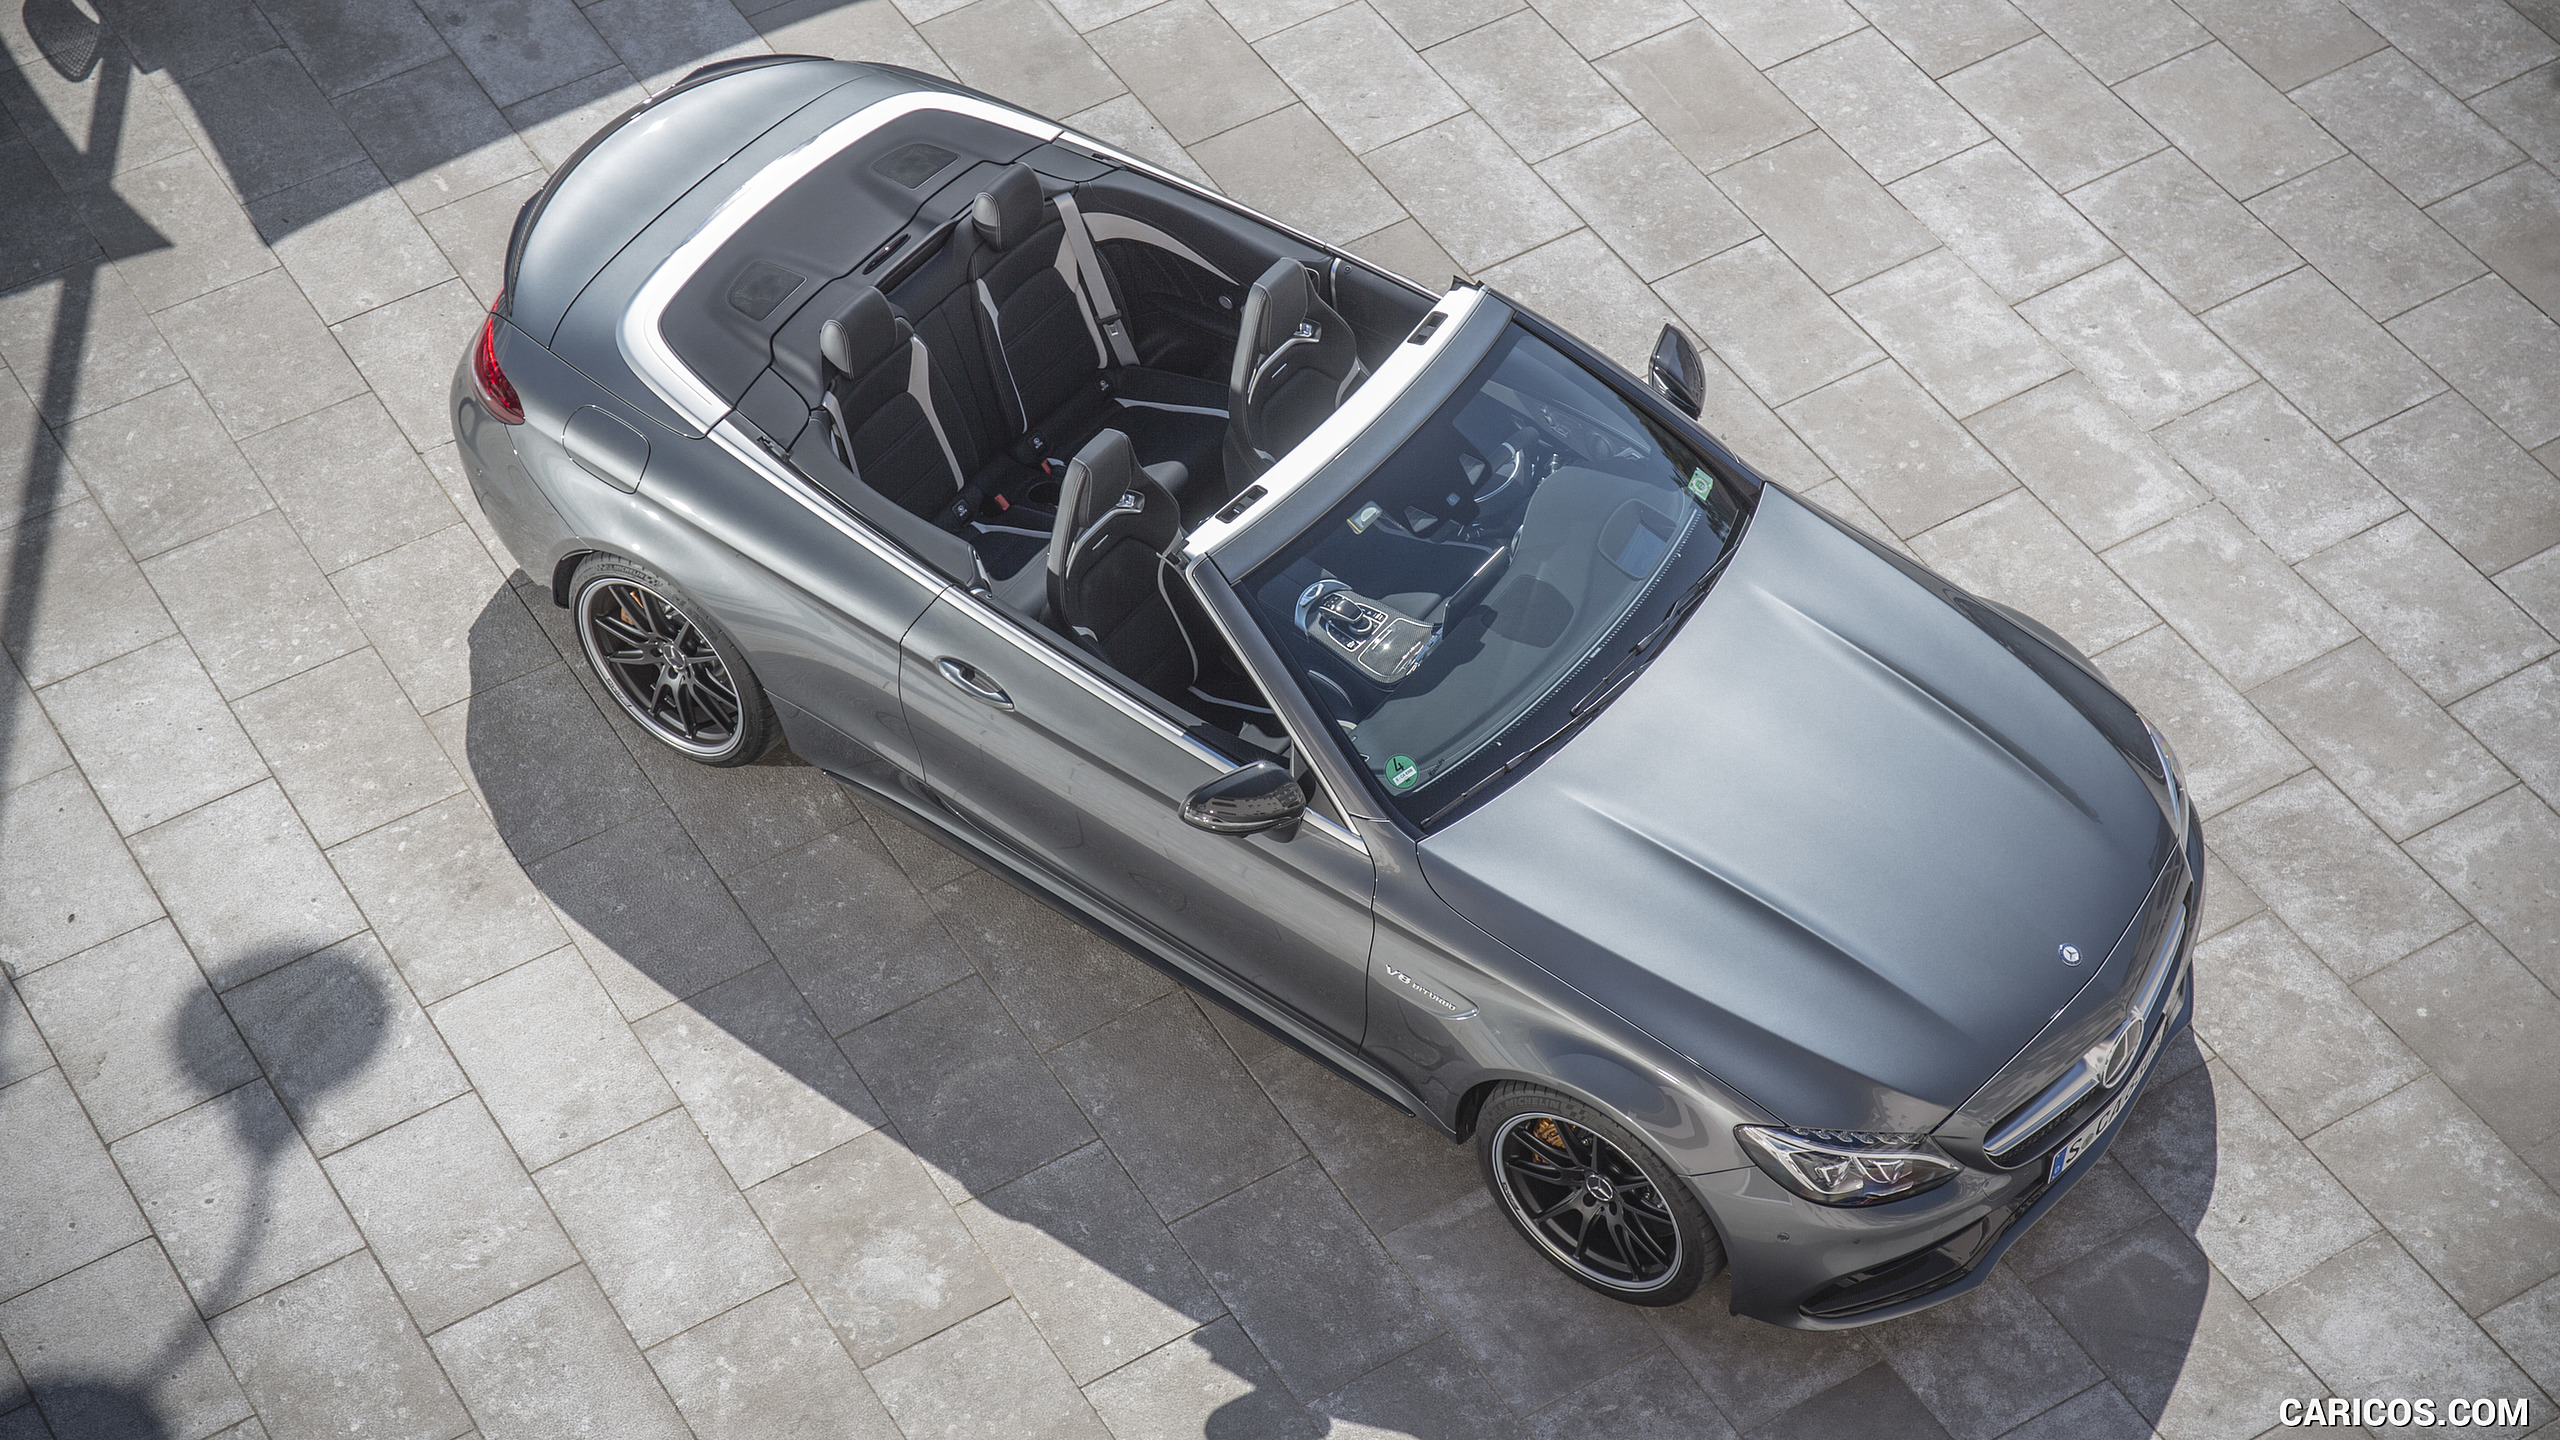 2017 Mercedes-AMG C63 S Cabriolet - Top, #59 of 222